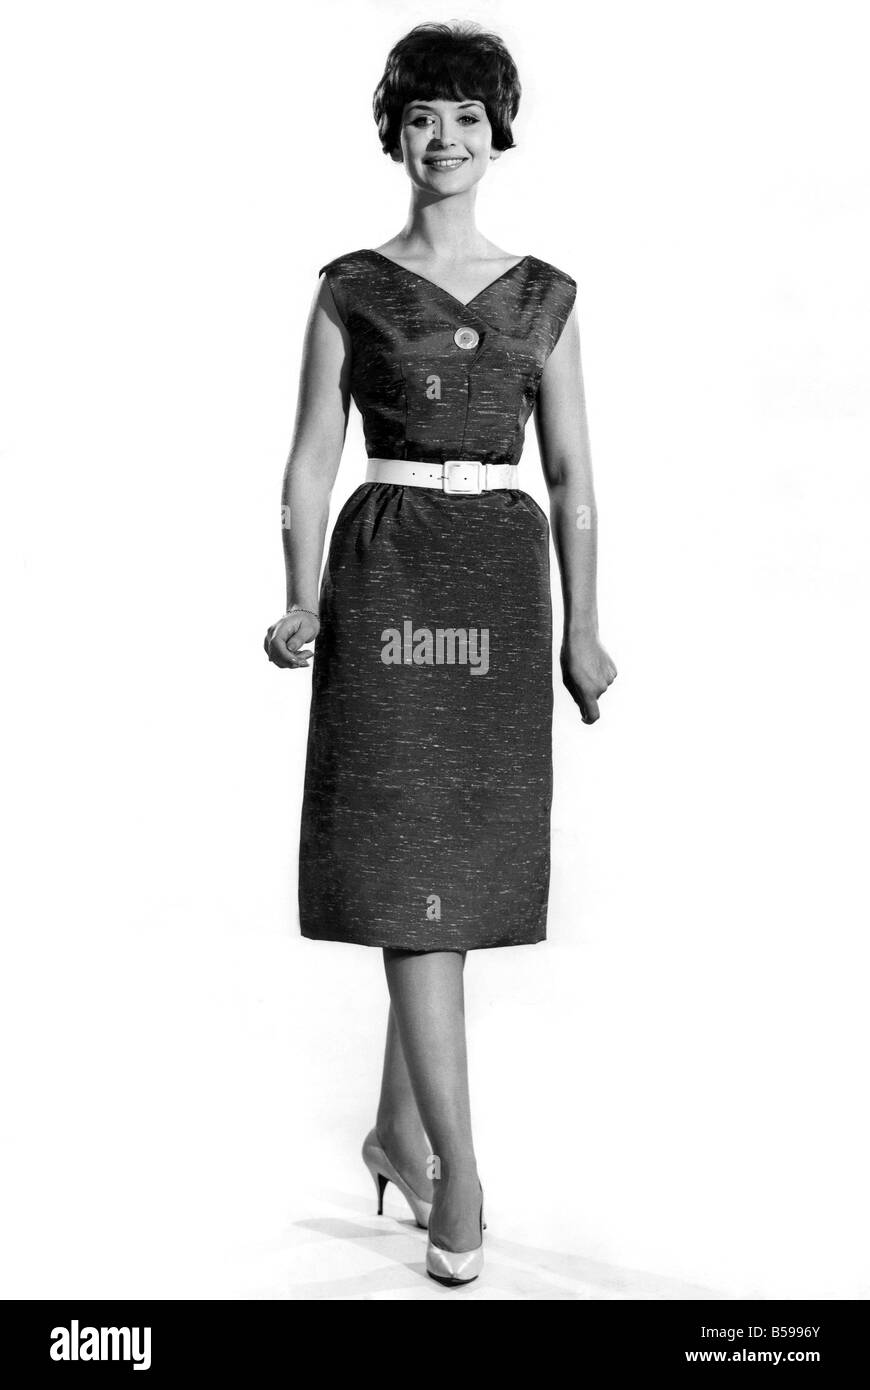 Reveille Fashions: Ann Cave modeling a summer dress with white belt ...